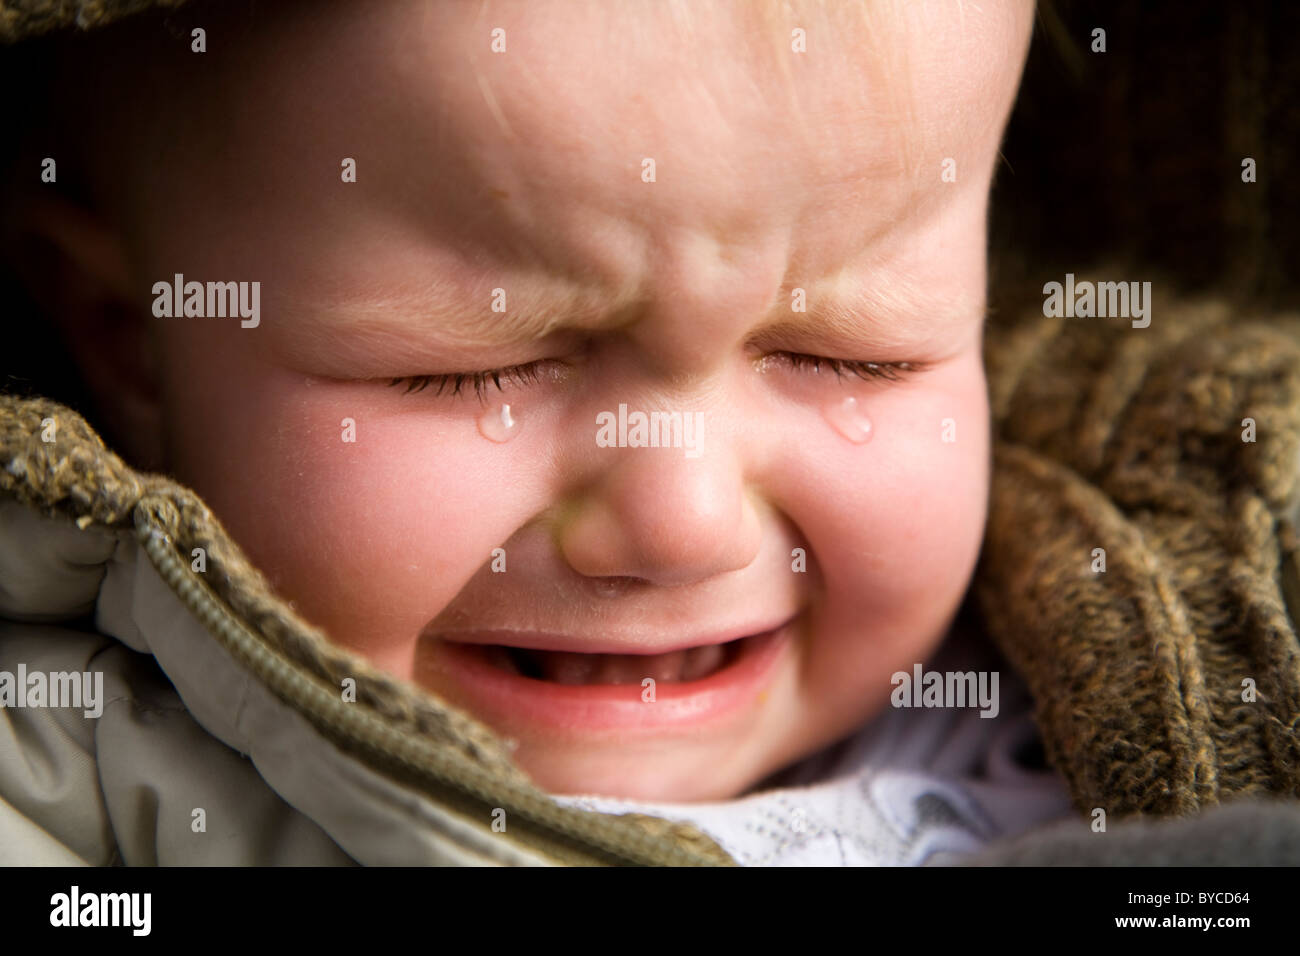 Face of an unhappy baby (young toddler) cry / crying / cries / scream / screaming. Stock Photo